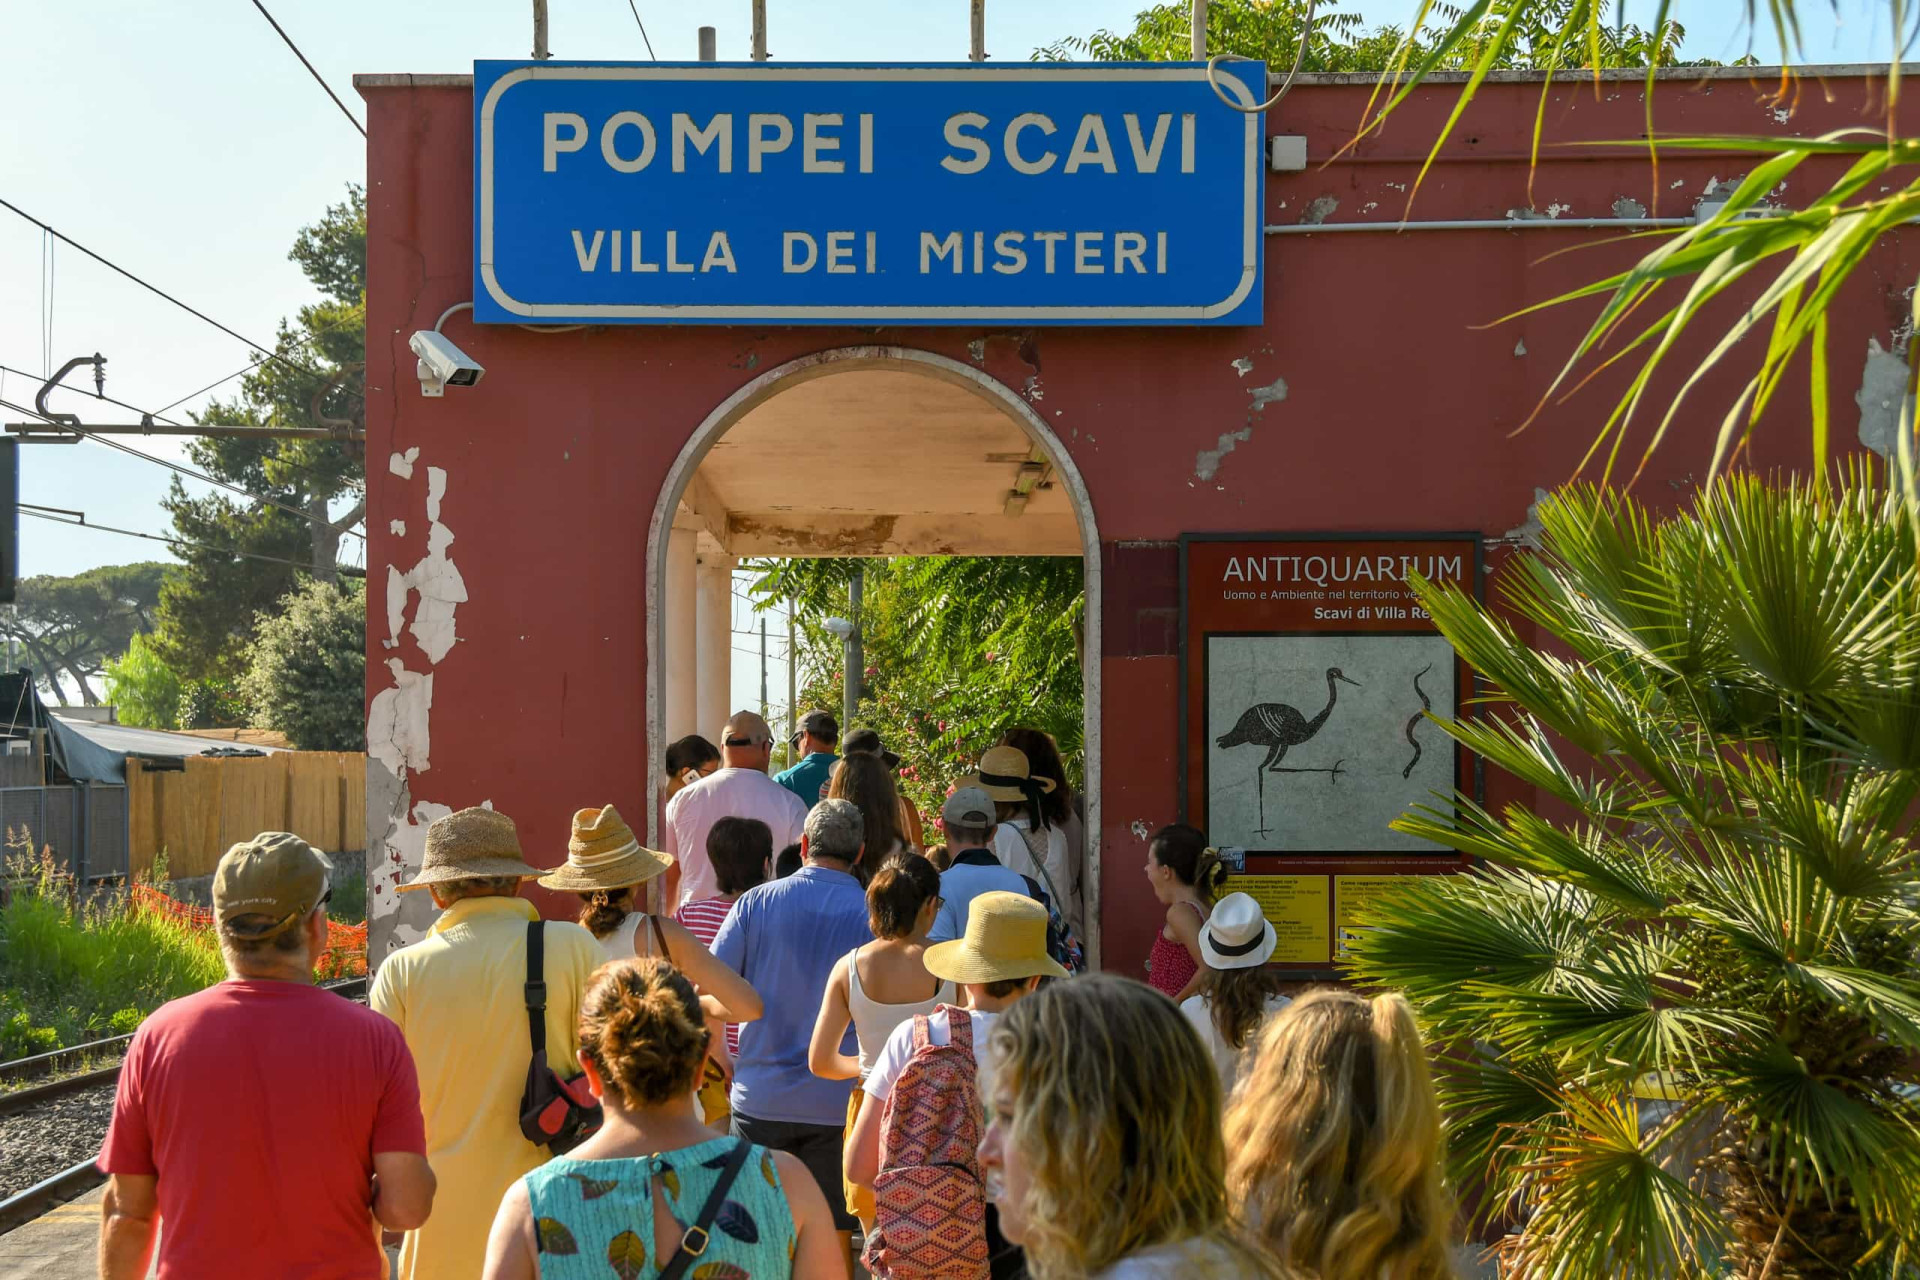 Pompeii is very easy to access by train. The station is just a short walk away from the ancient city.<p>You may also like:<a href="https://www.starsinsider.com/n/299215?utm_source=msn.com&utm_medium=display&utm_campaign=referral_description&utm_content=450429v6en-us"> Sandra Bullock and other famous figures who lost their significant other</a></p>